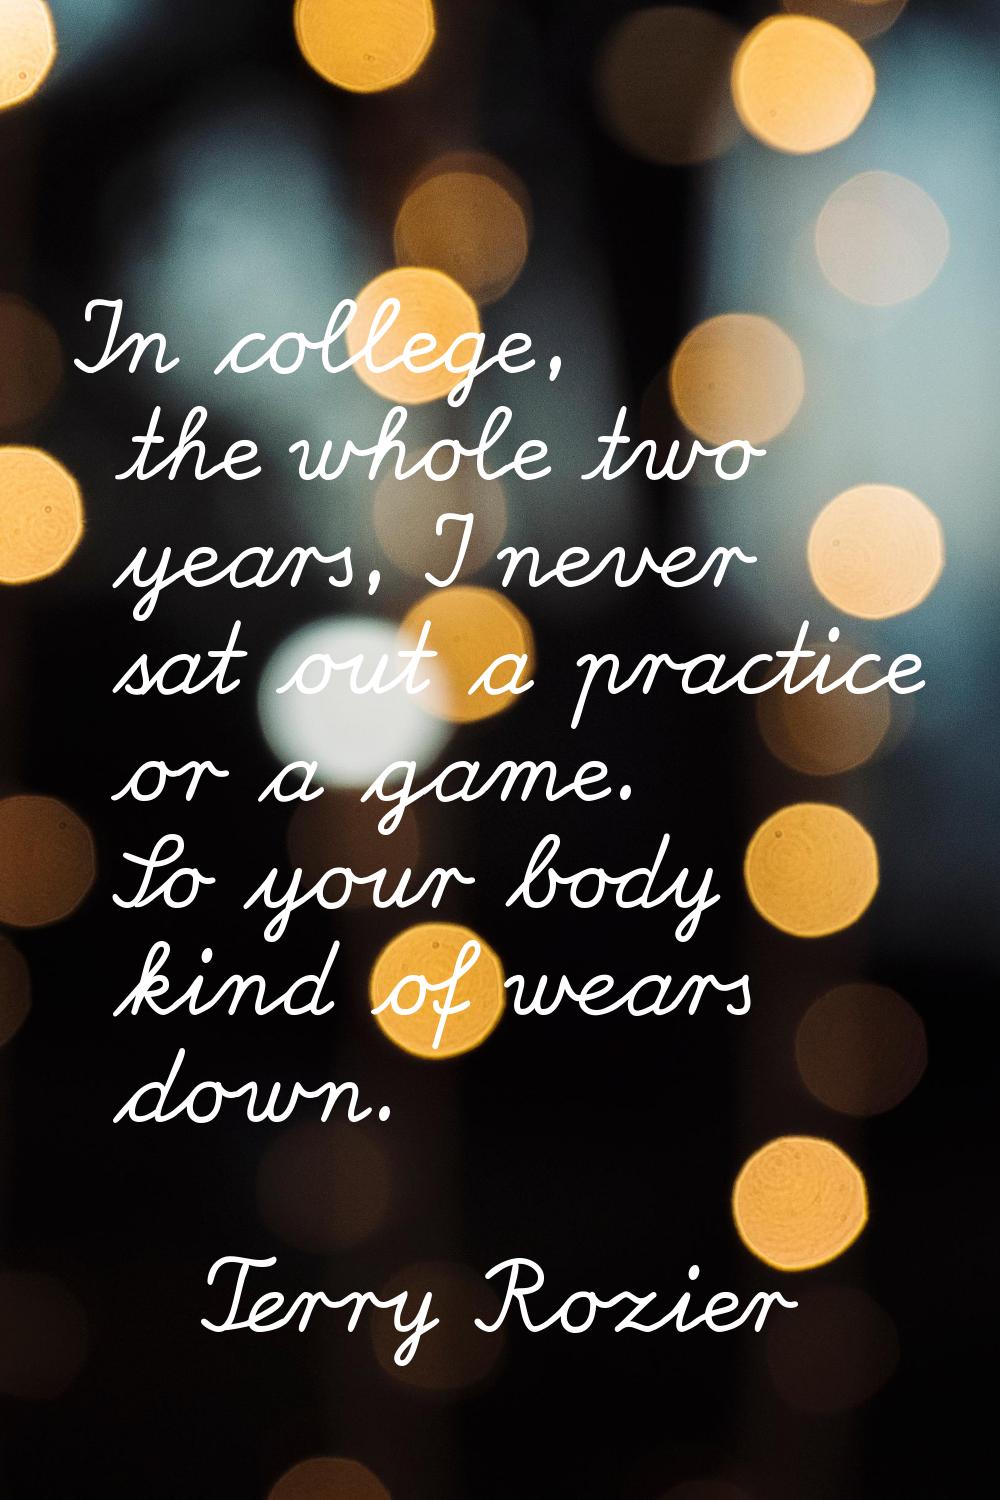 In college, the whole two years, I never sat out a practice or a game. So your body kind of wears d